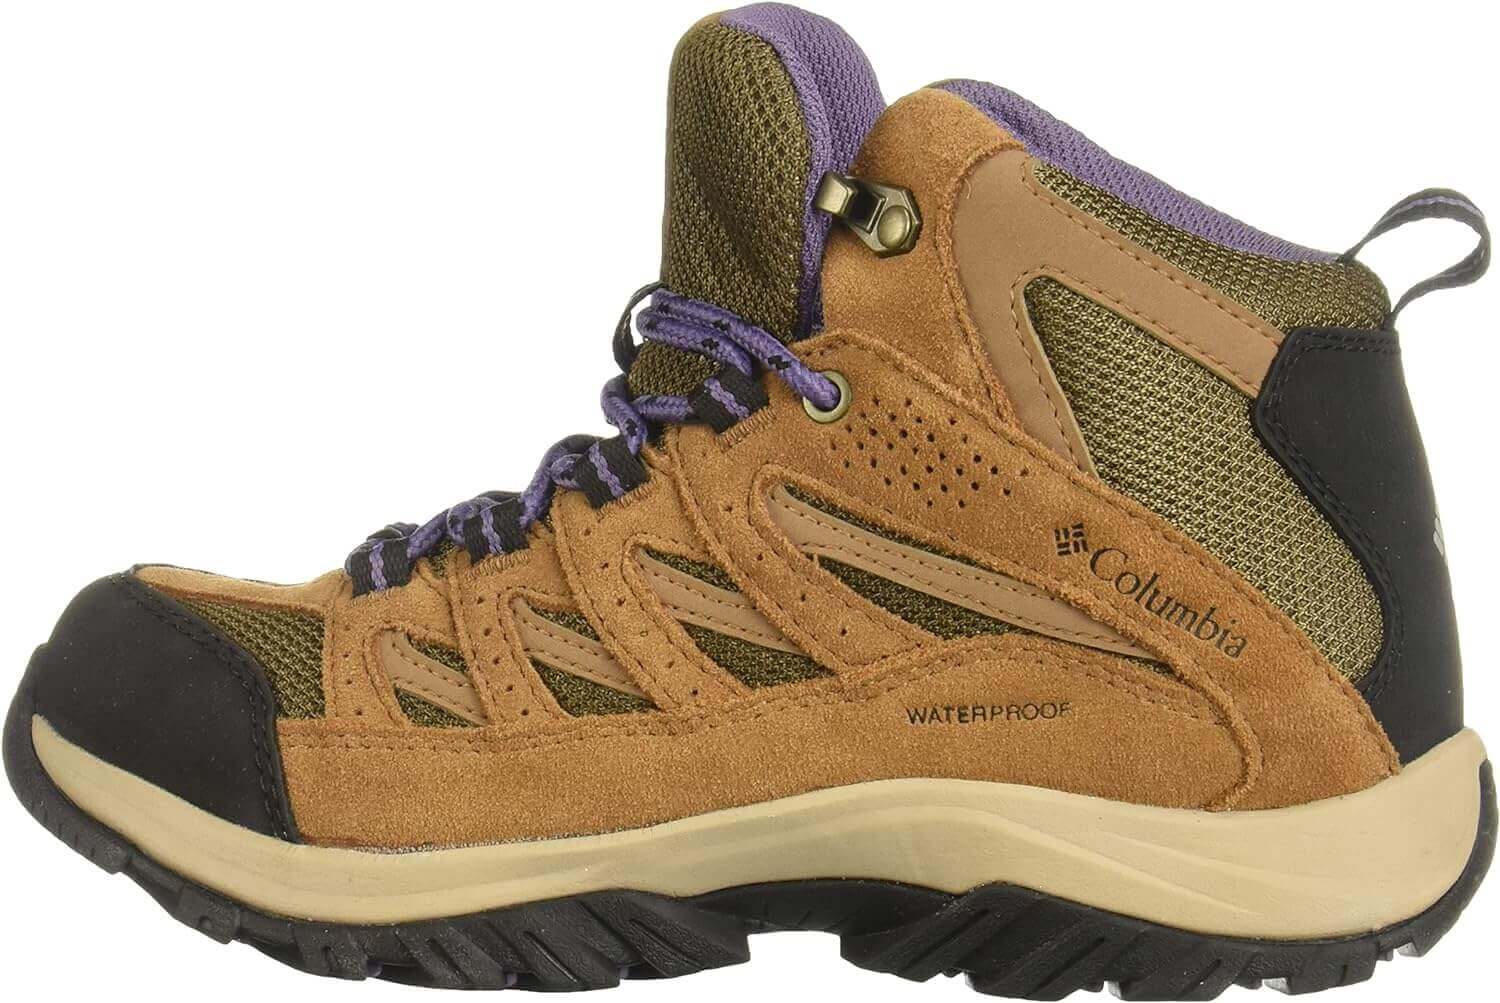 Shop The Latest >Columbia Women's Crestwood Mid Waterproof Hiking Boot > *Only $94.04*> From The Top Brand > *Columbial* > Shop Now and Get Free Shipping On Orders Over $45.00 >*Shop Earth Foot*